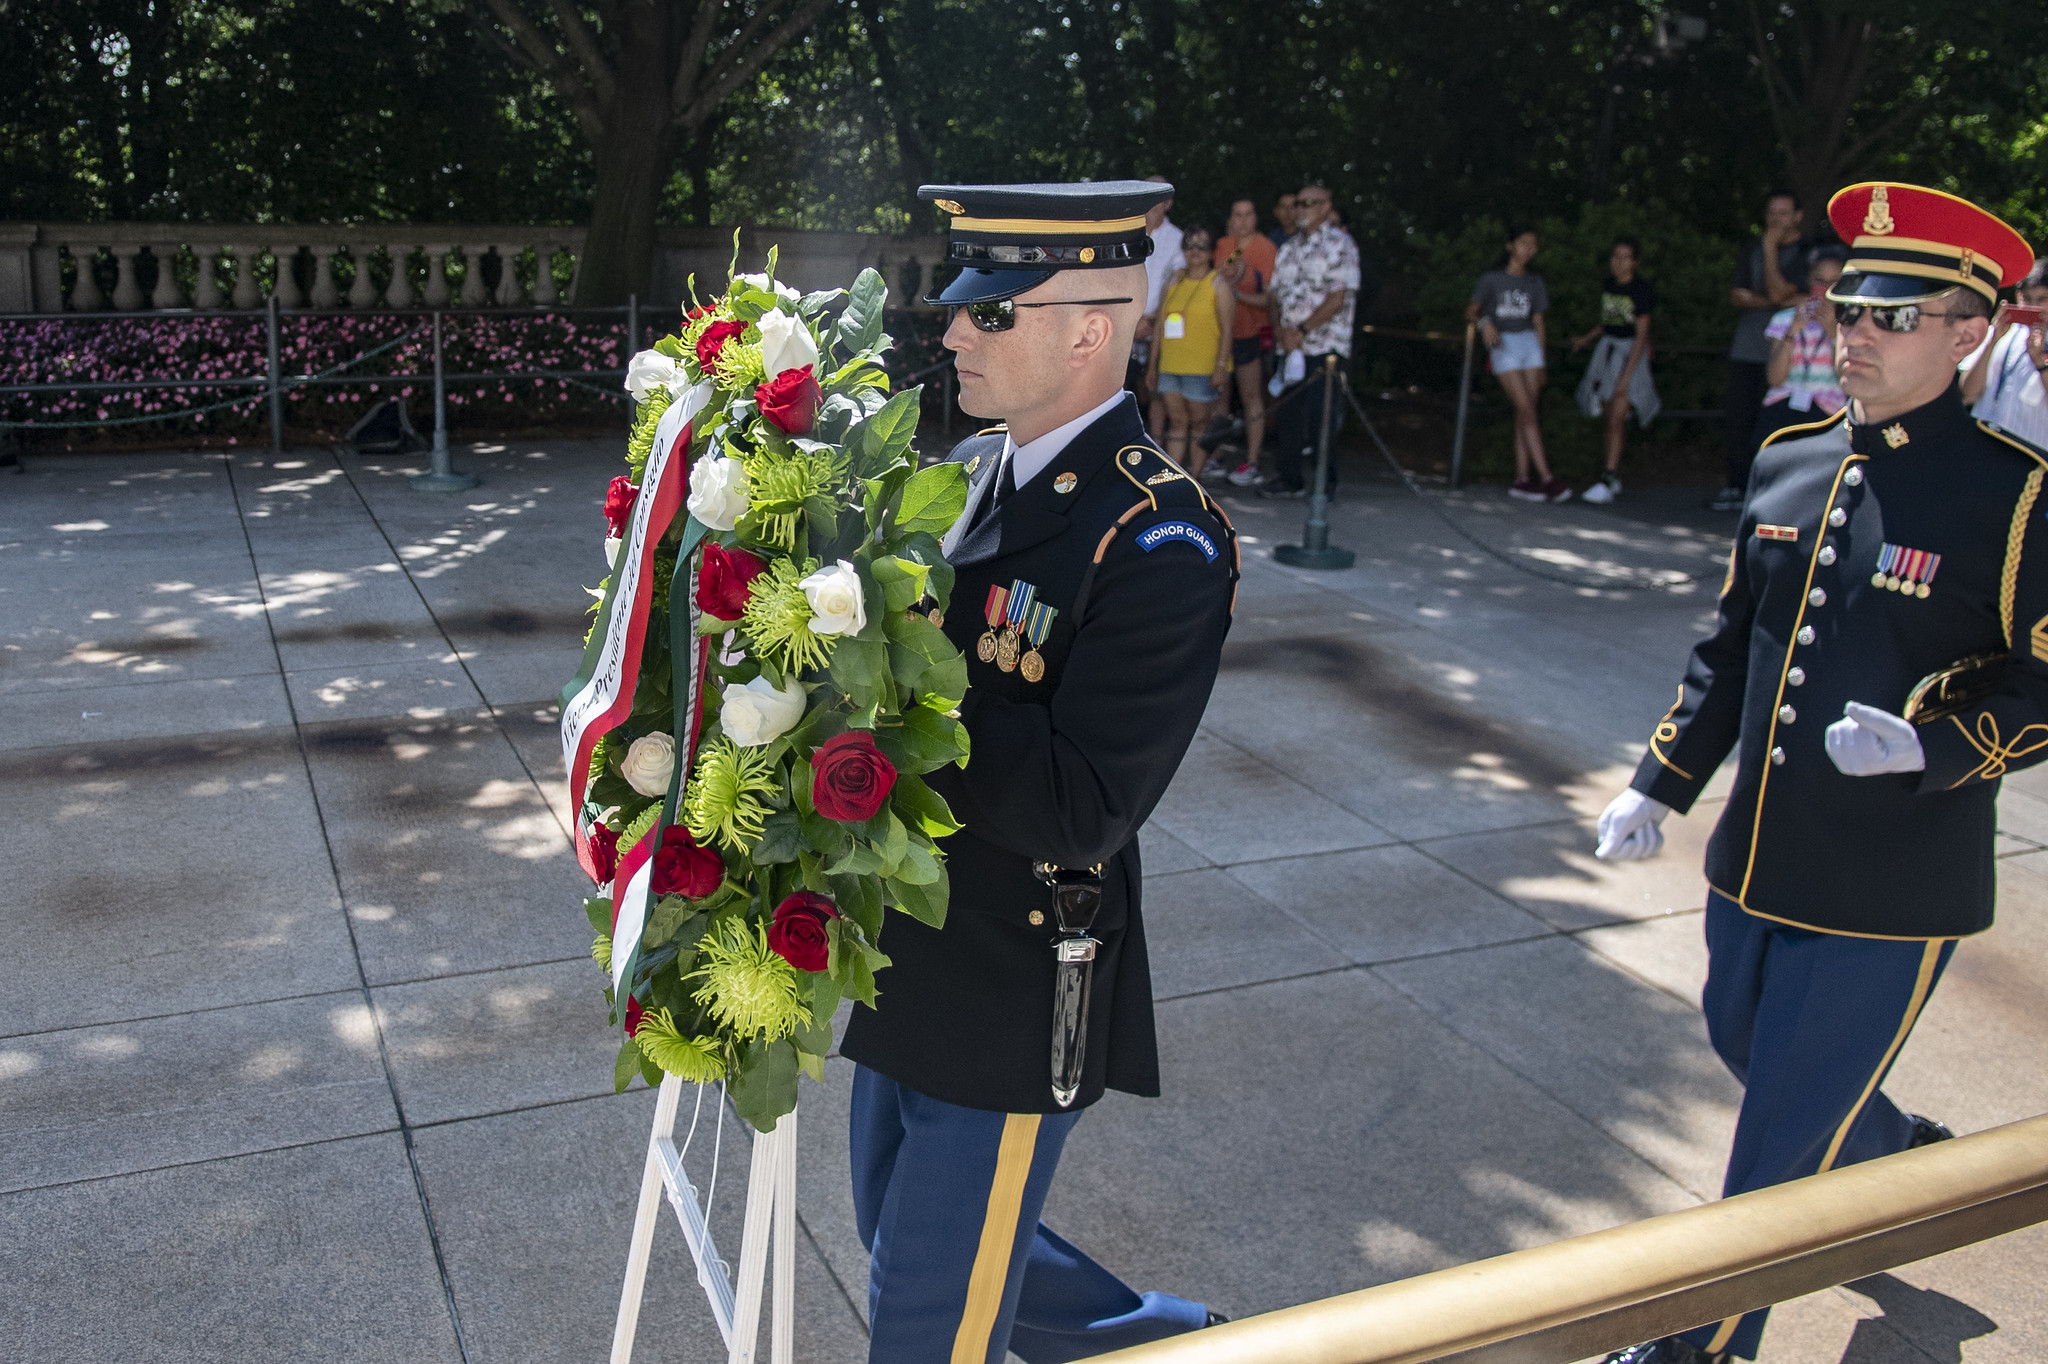 A uniformed soldier plans to lay a wreath at the Tomb of the Unknown Soldier